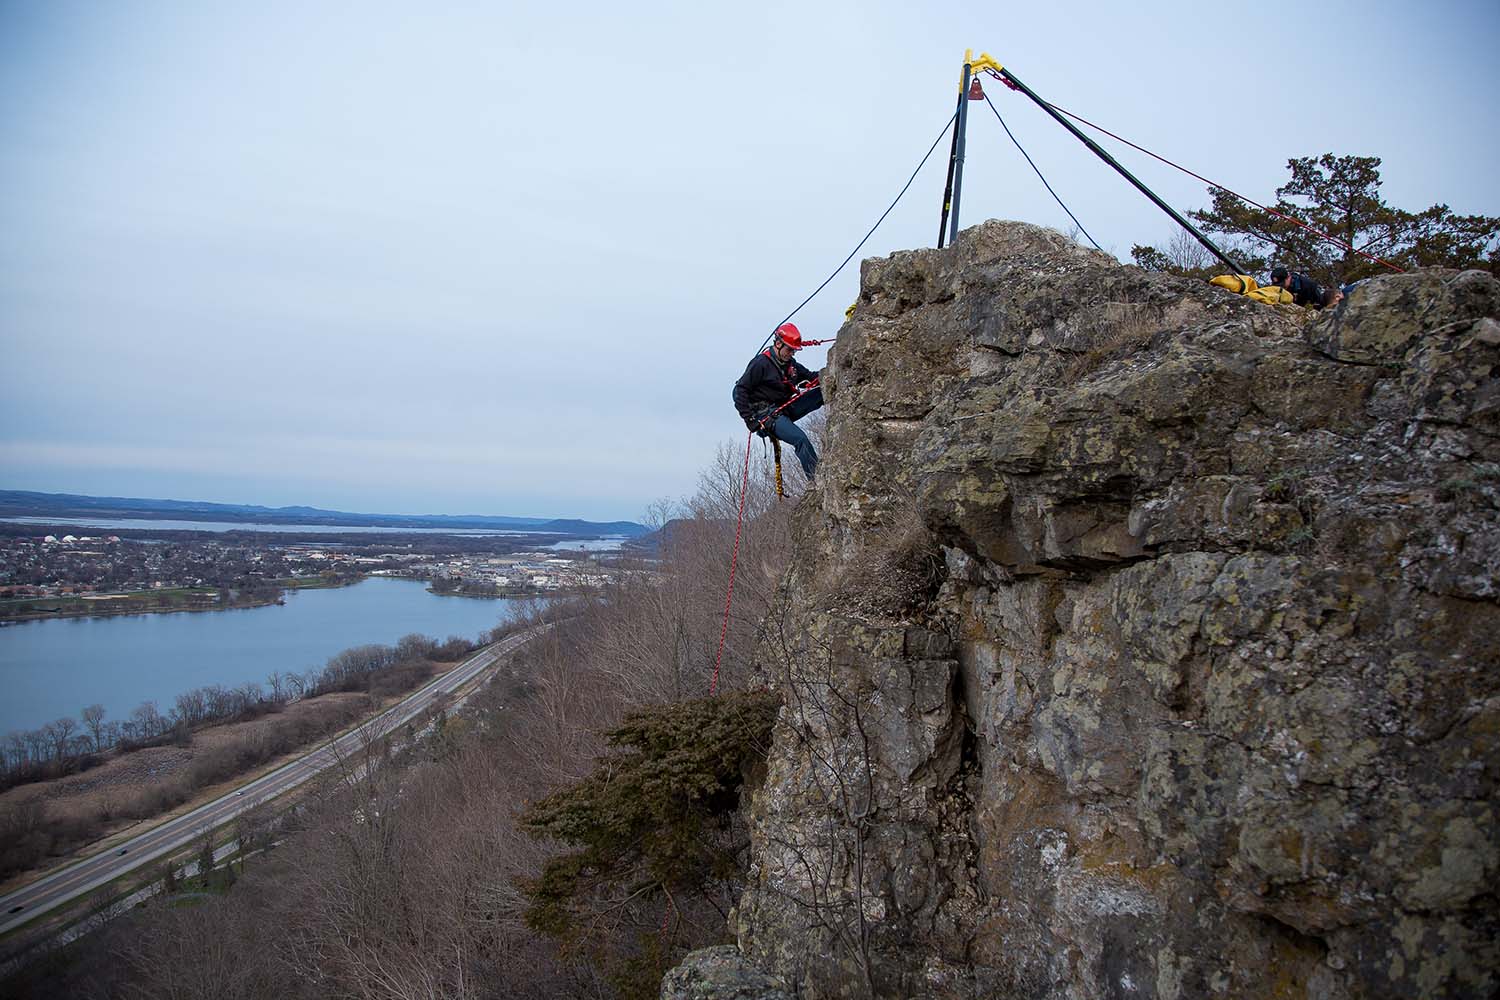 Winona firefighter Charlie Casperson rappels from the west side of Garvin Heights’ scenic lookout using the Arizona Vortex to retrieve a sofa that was thrown over the edge. The team of firefighters and park maintenance crewmembers picked up trash from the lookout on Wednesday, April 5.